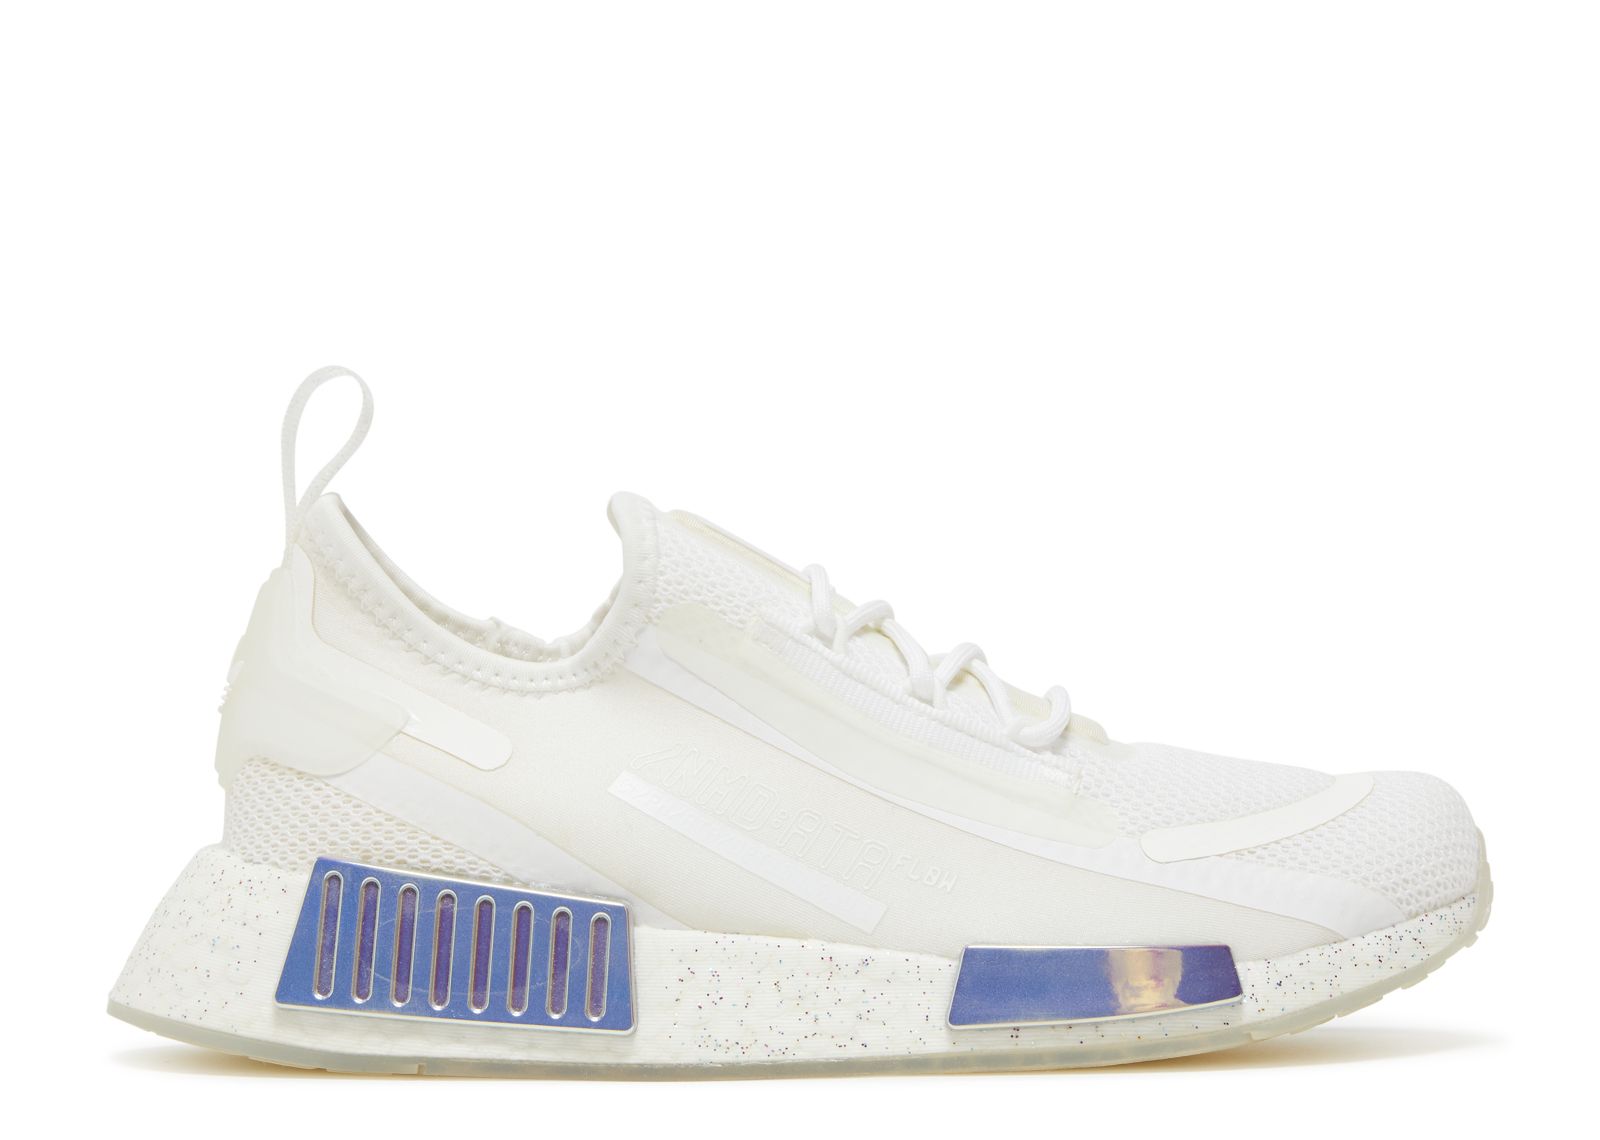 Wmns NMD_R1 Spectoo 'White Iridescent' - Adidas - GZ9289 - cloud